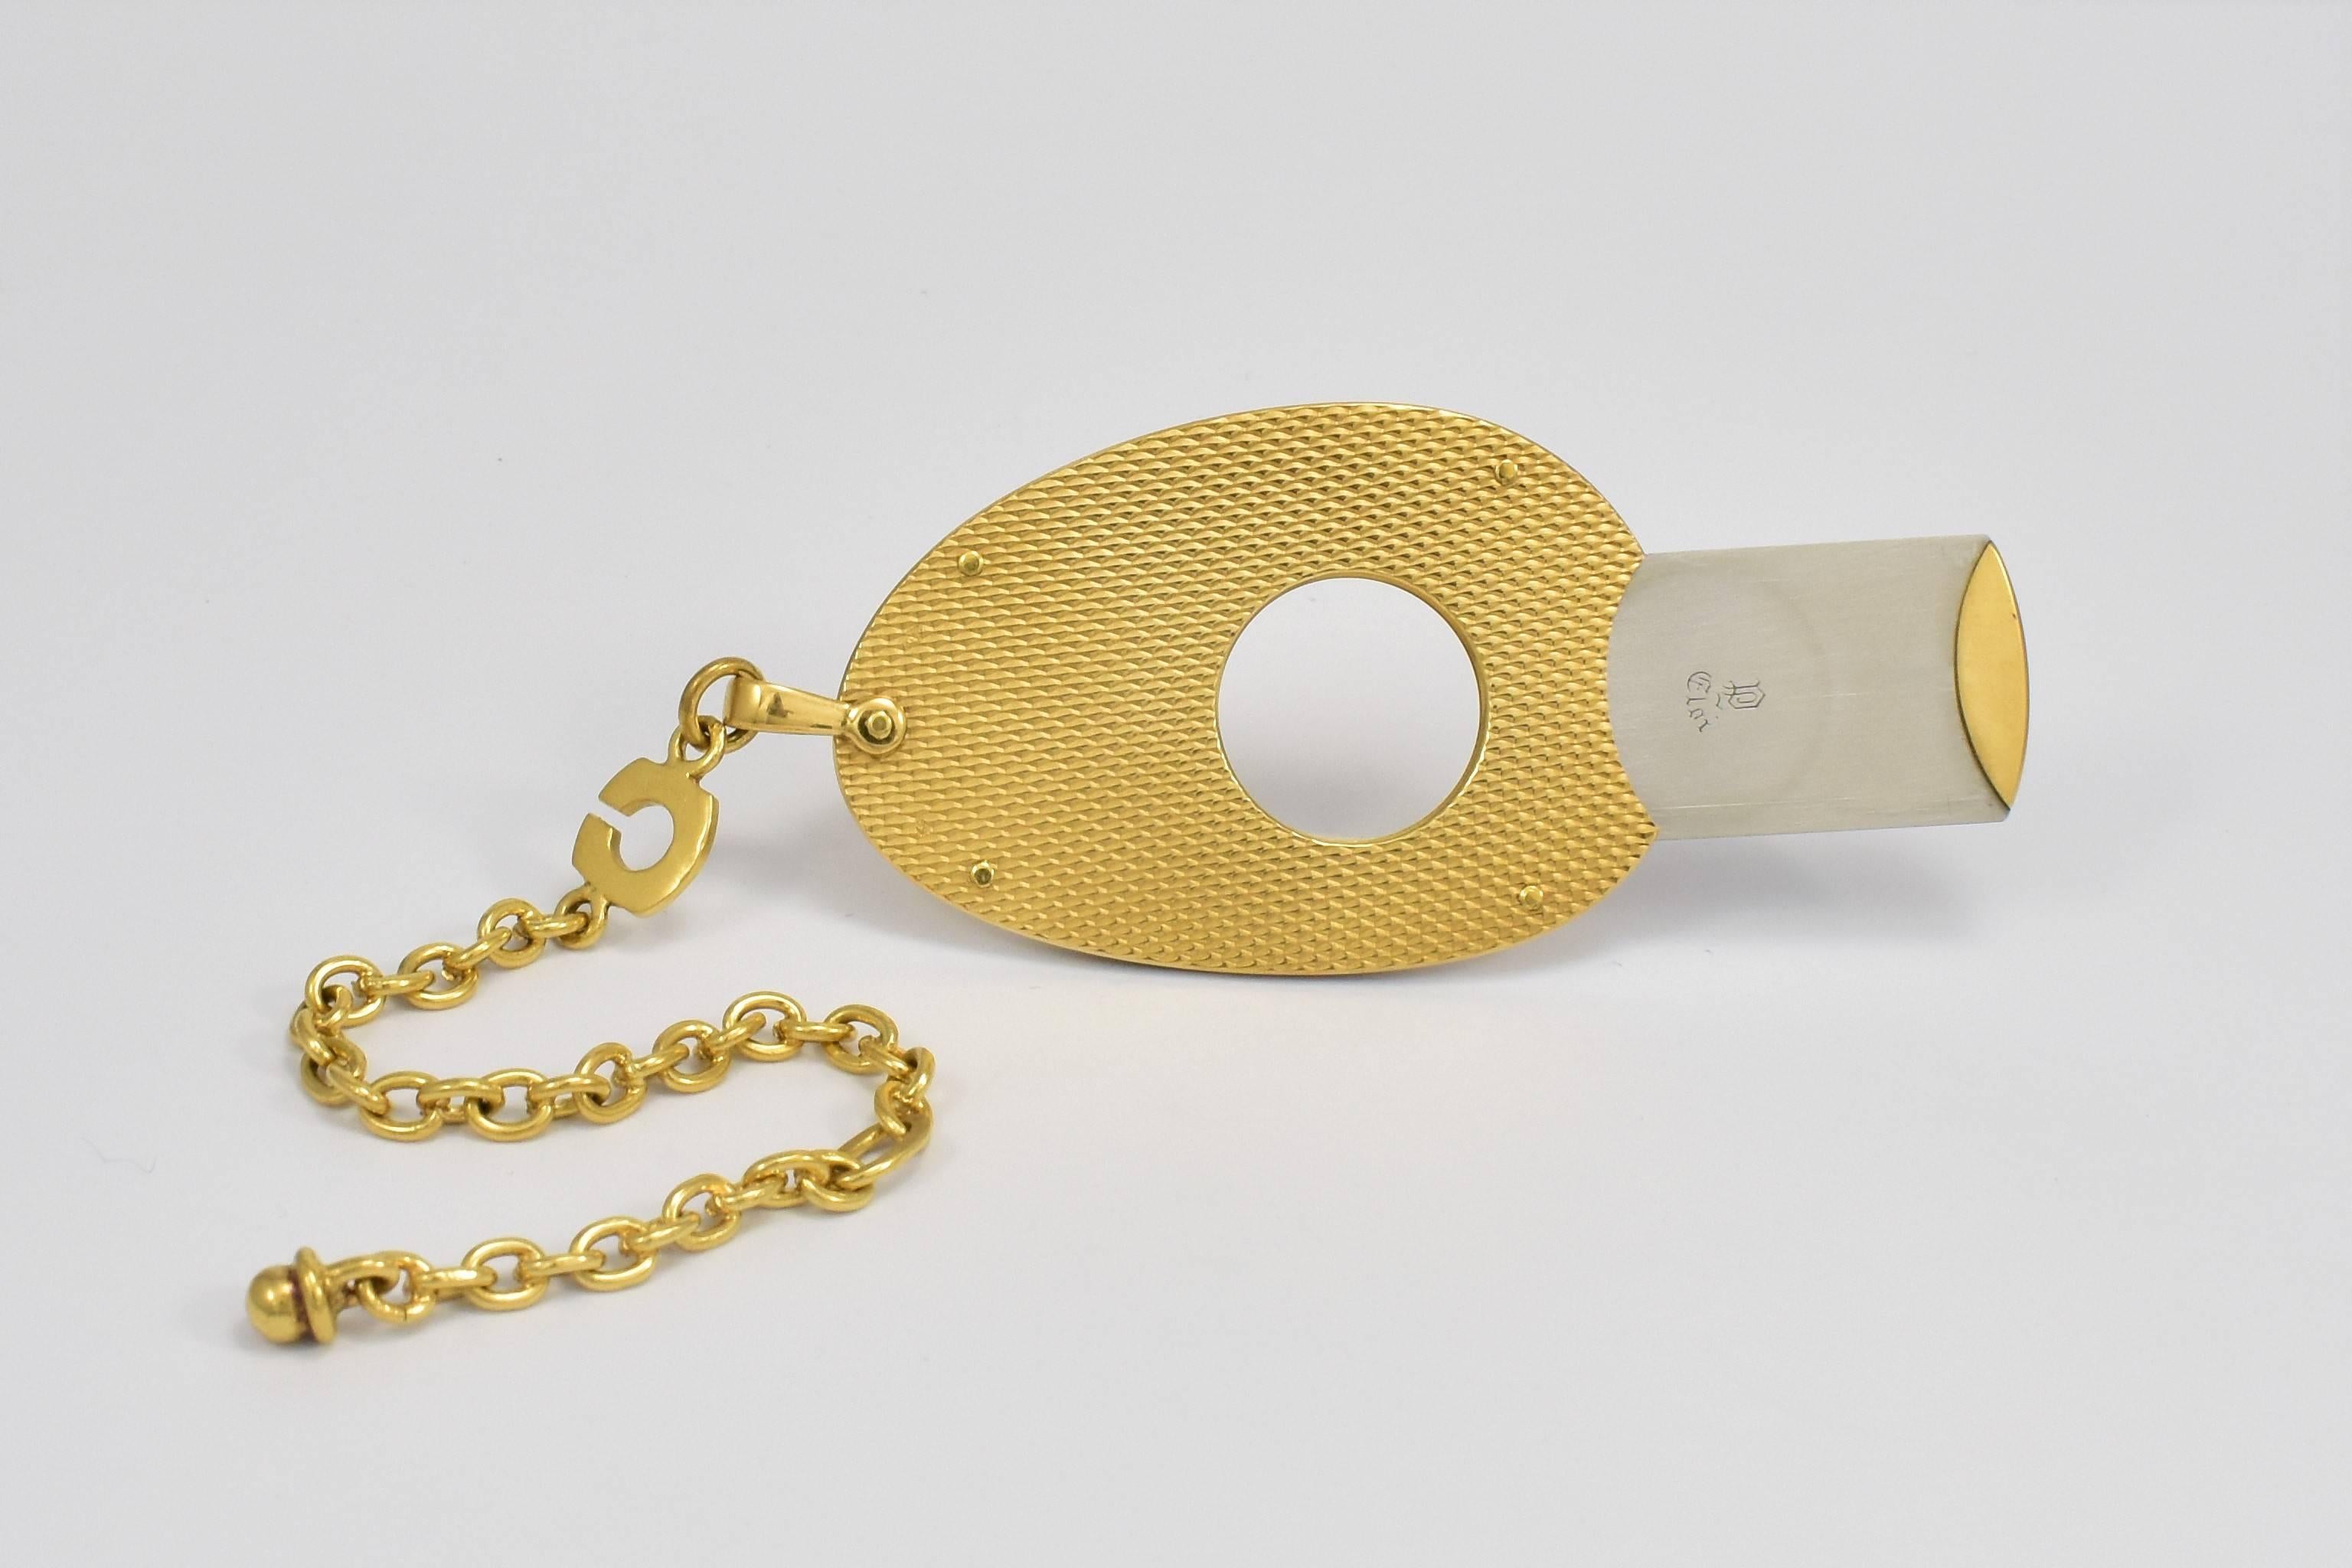 An Eloi oval shaped cigar cutter with a highly polished textured finish. No UK Hallmark as originated in France, however tested as 18 karat gold with a stainless steel inside for blade etc. French hallmark. Unused and sharp full function as new.